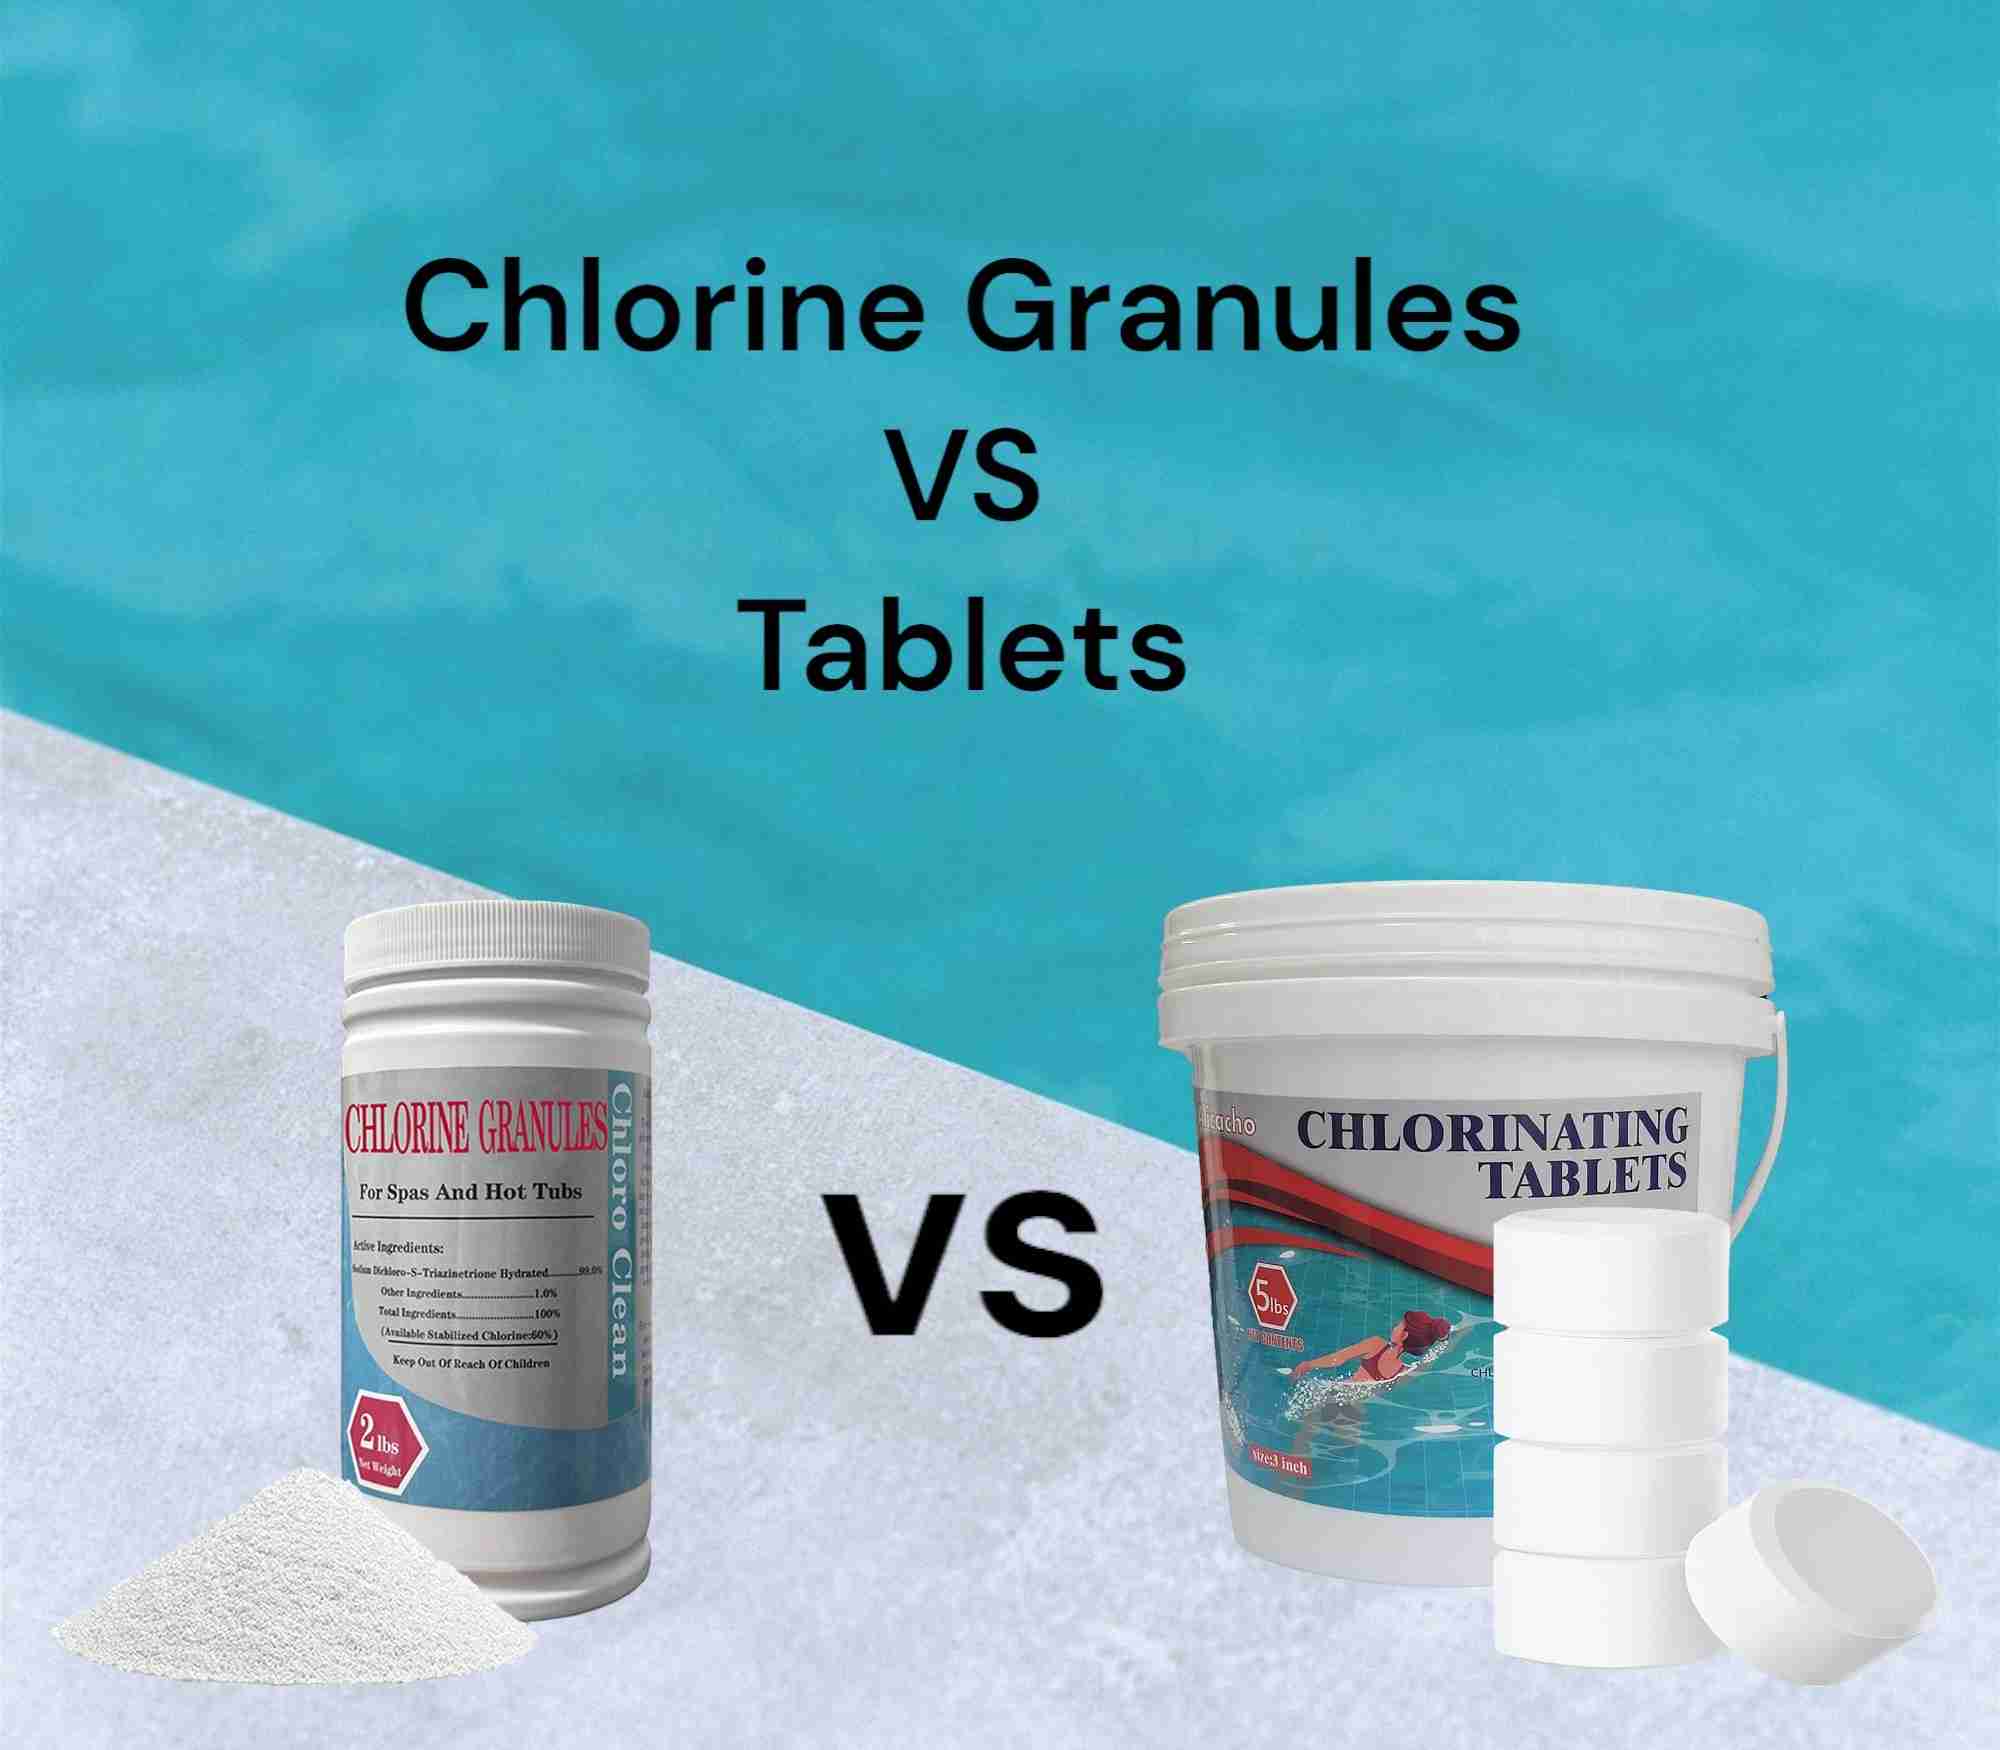 Chlorine Granules Vs Tablets: Which Is Better?